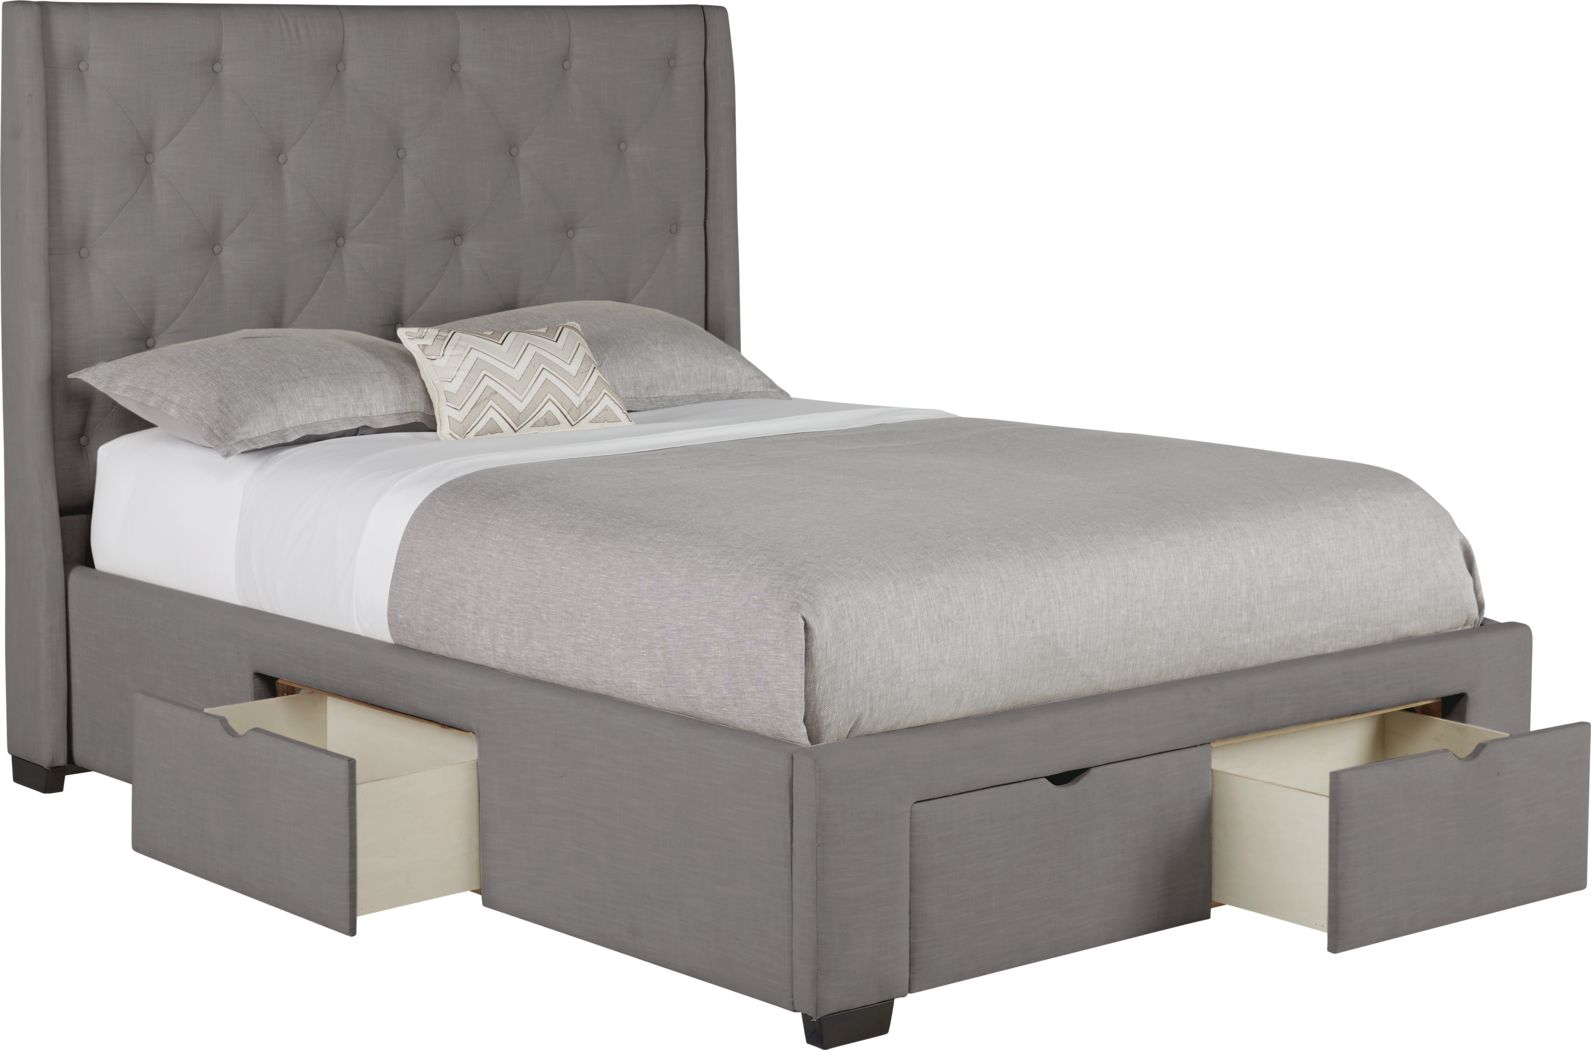 Storage King Size Beds, King Bed With Storage Drawers